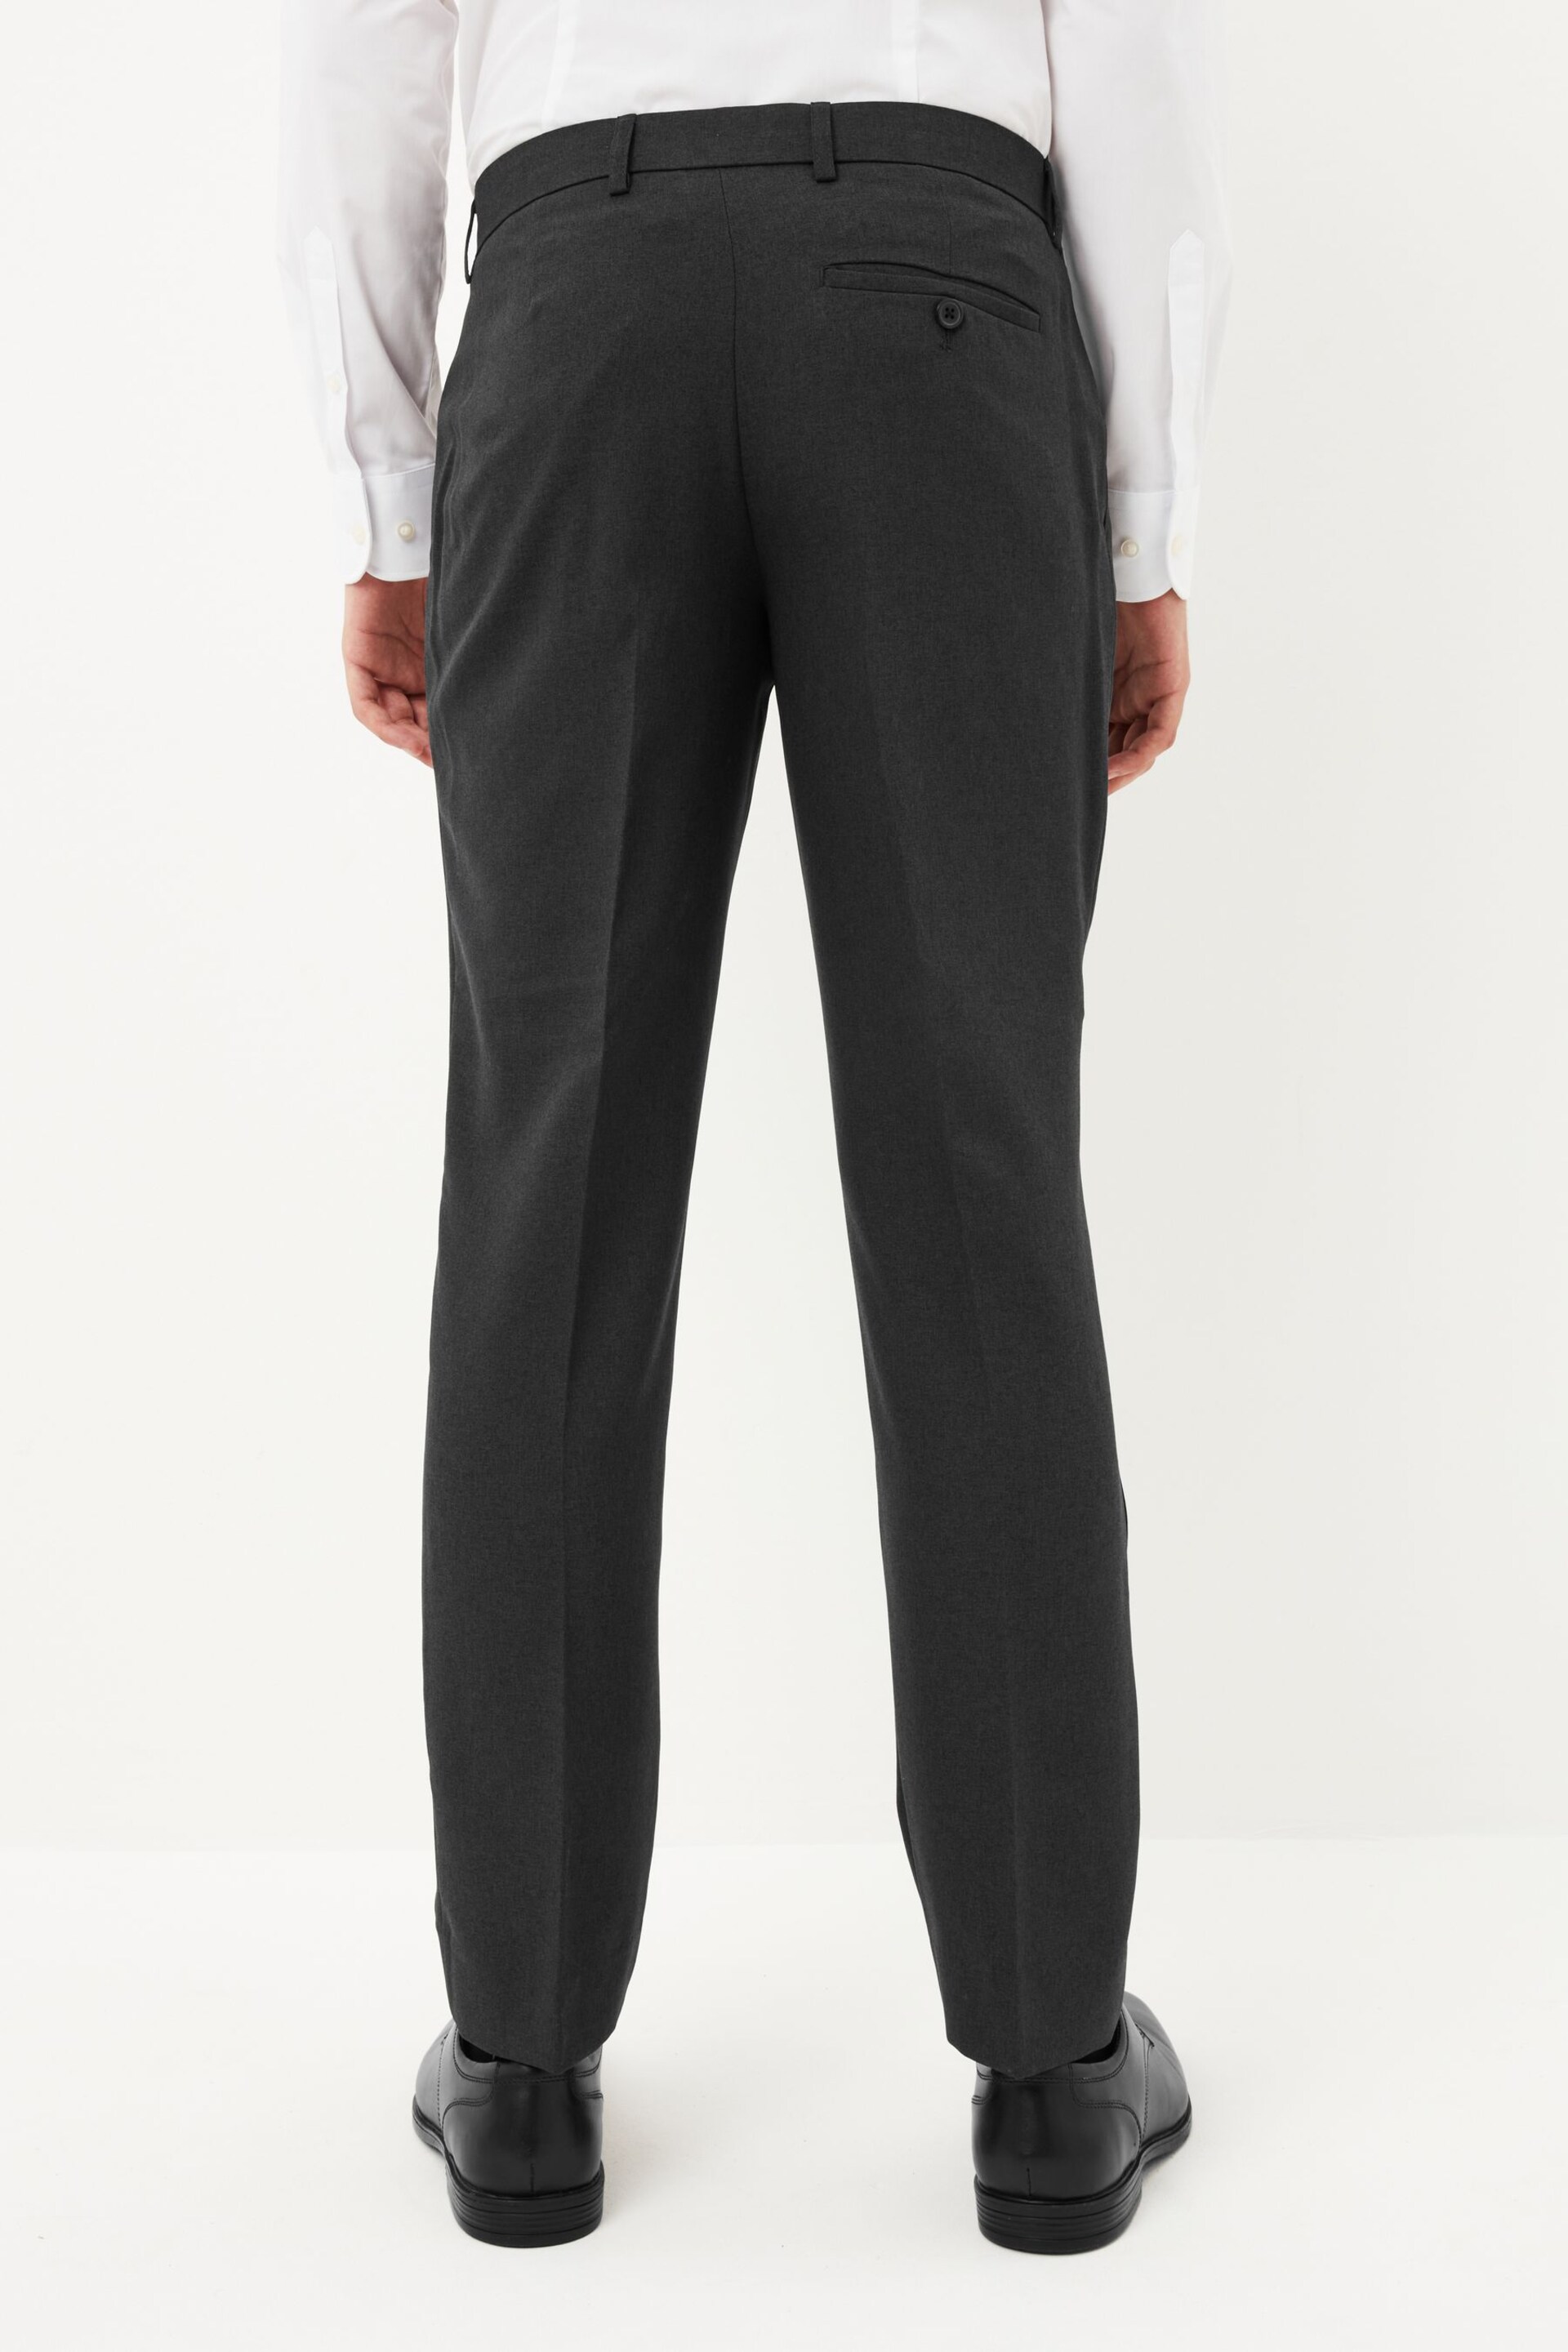 Charcoal Grey Slim Machine Washable Plain Front Smart Trousers - Image 4 of 6